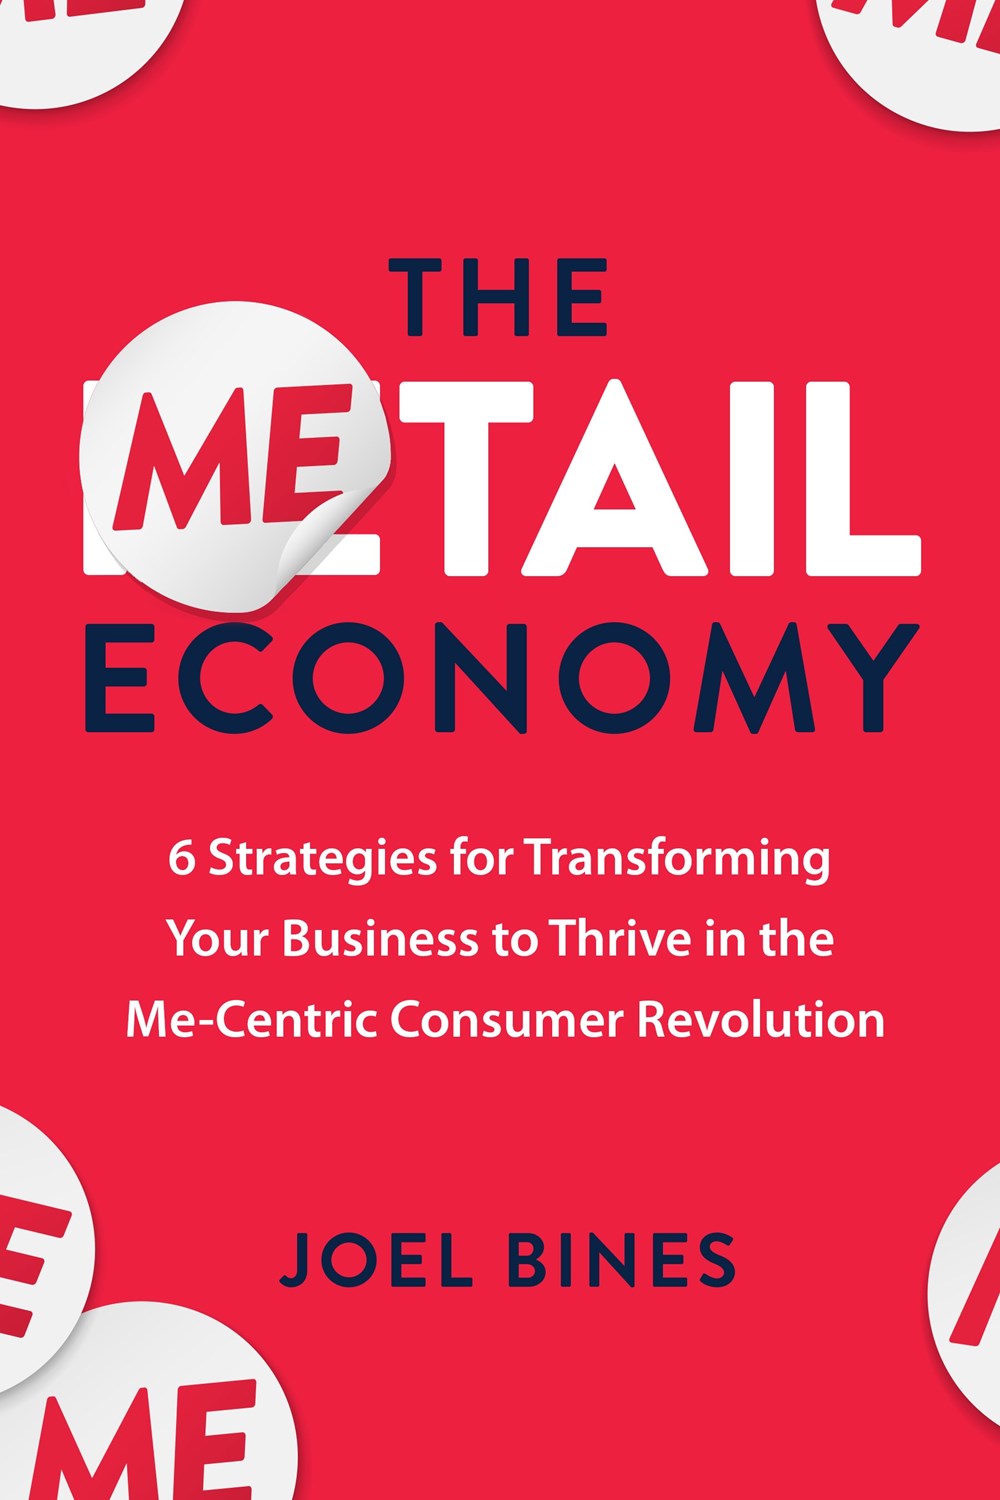 Metail Economy 6 Strategies for Transforming Your Business to Thrive in the Me-Centric Consumer Revo